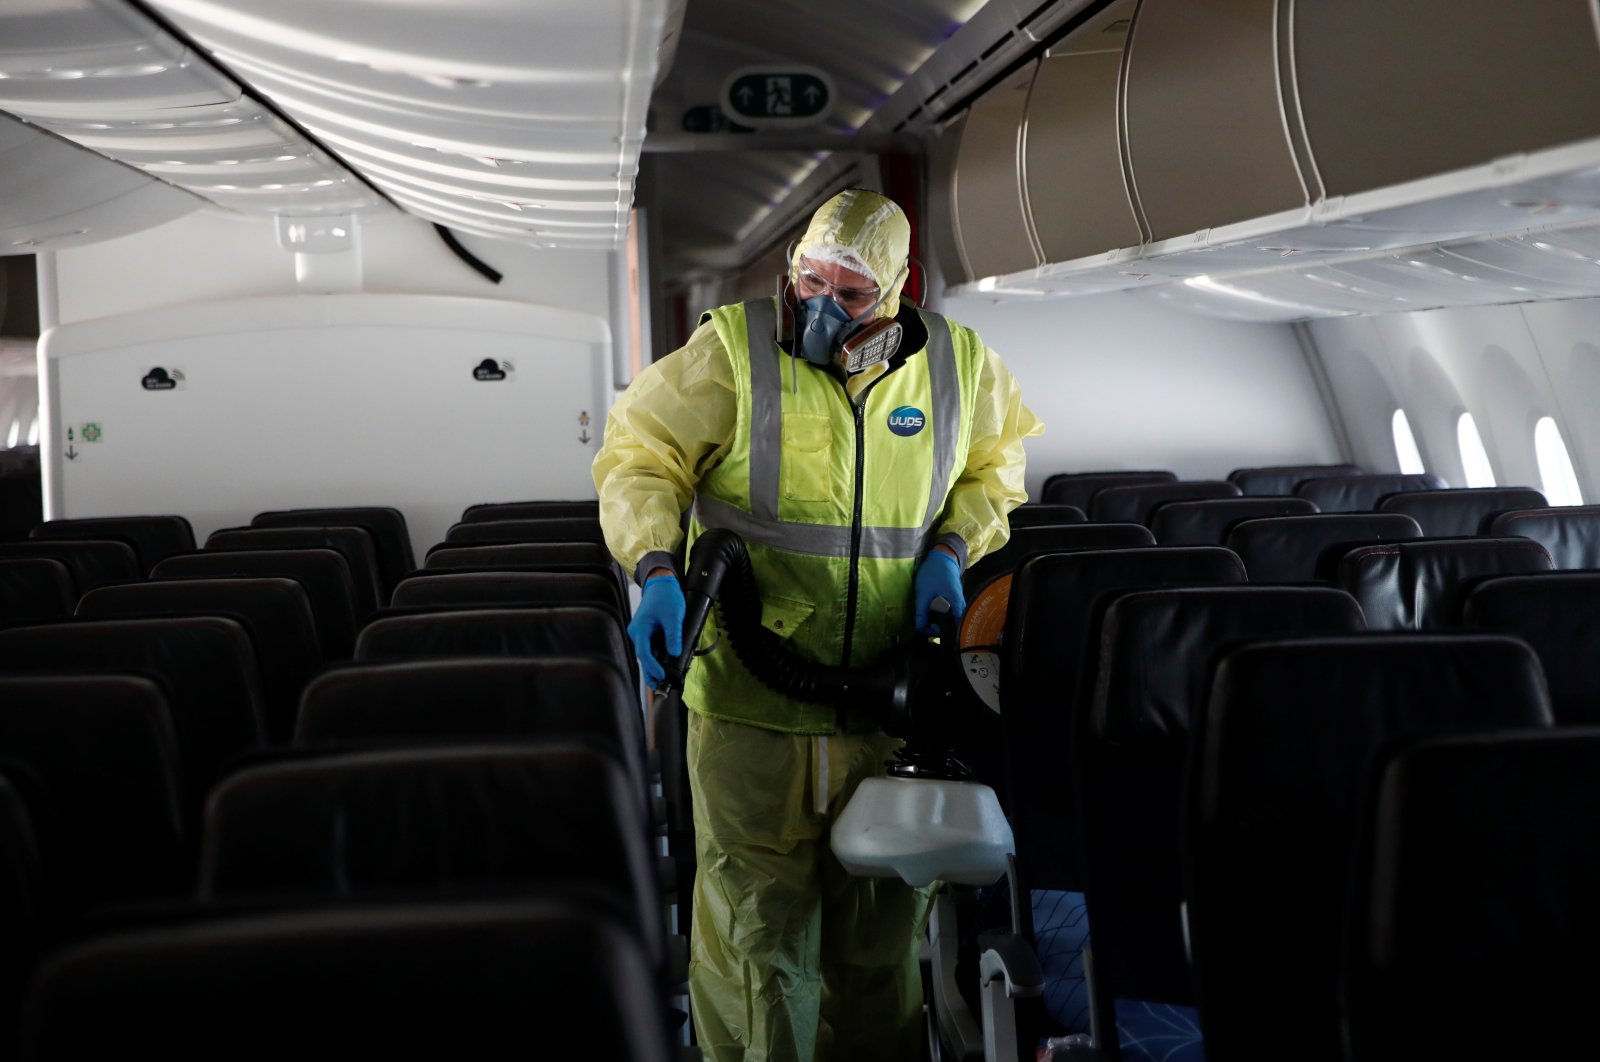 A worker, wearing a protective suit, sprays disinfectant inside an Air France Boeing 787 aircraft during a presentation of new security and health measures at Paris Charles de Gaulle airport in Roissy-en-France during the outbreak of the coronavirus in France, May 6, 2020. (Reuters Photo)